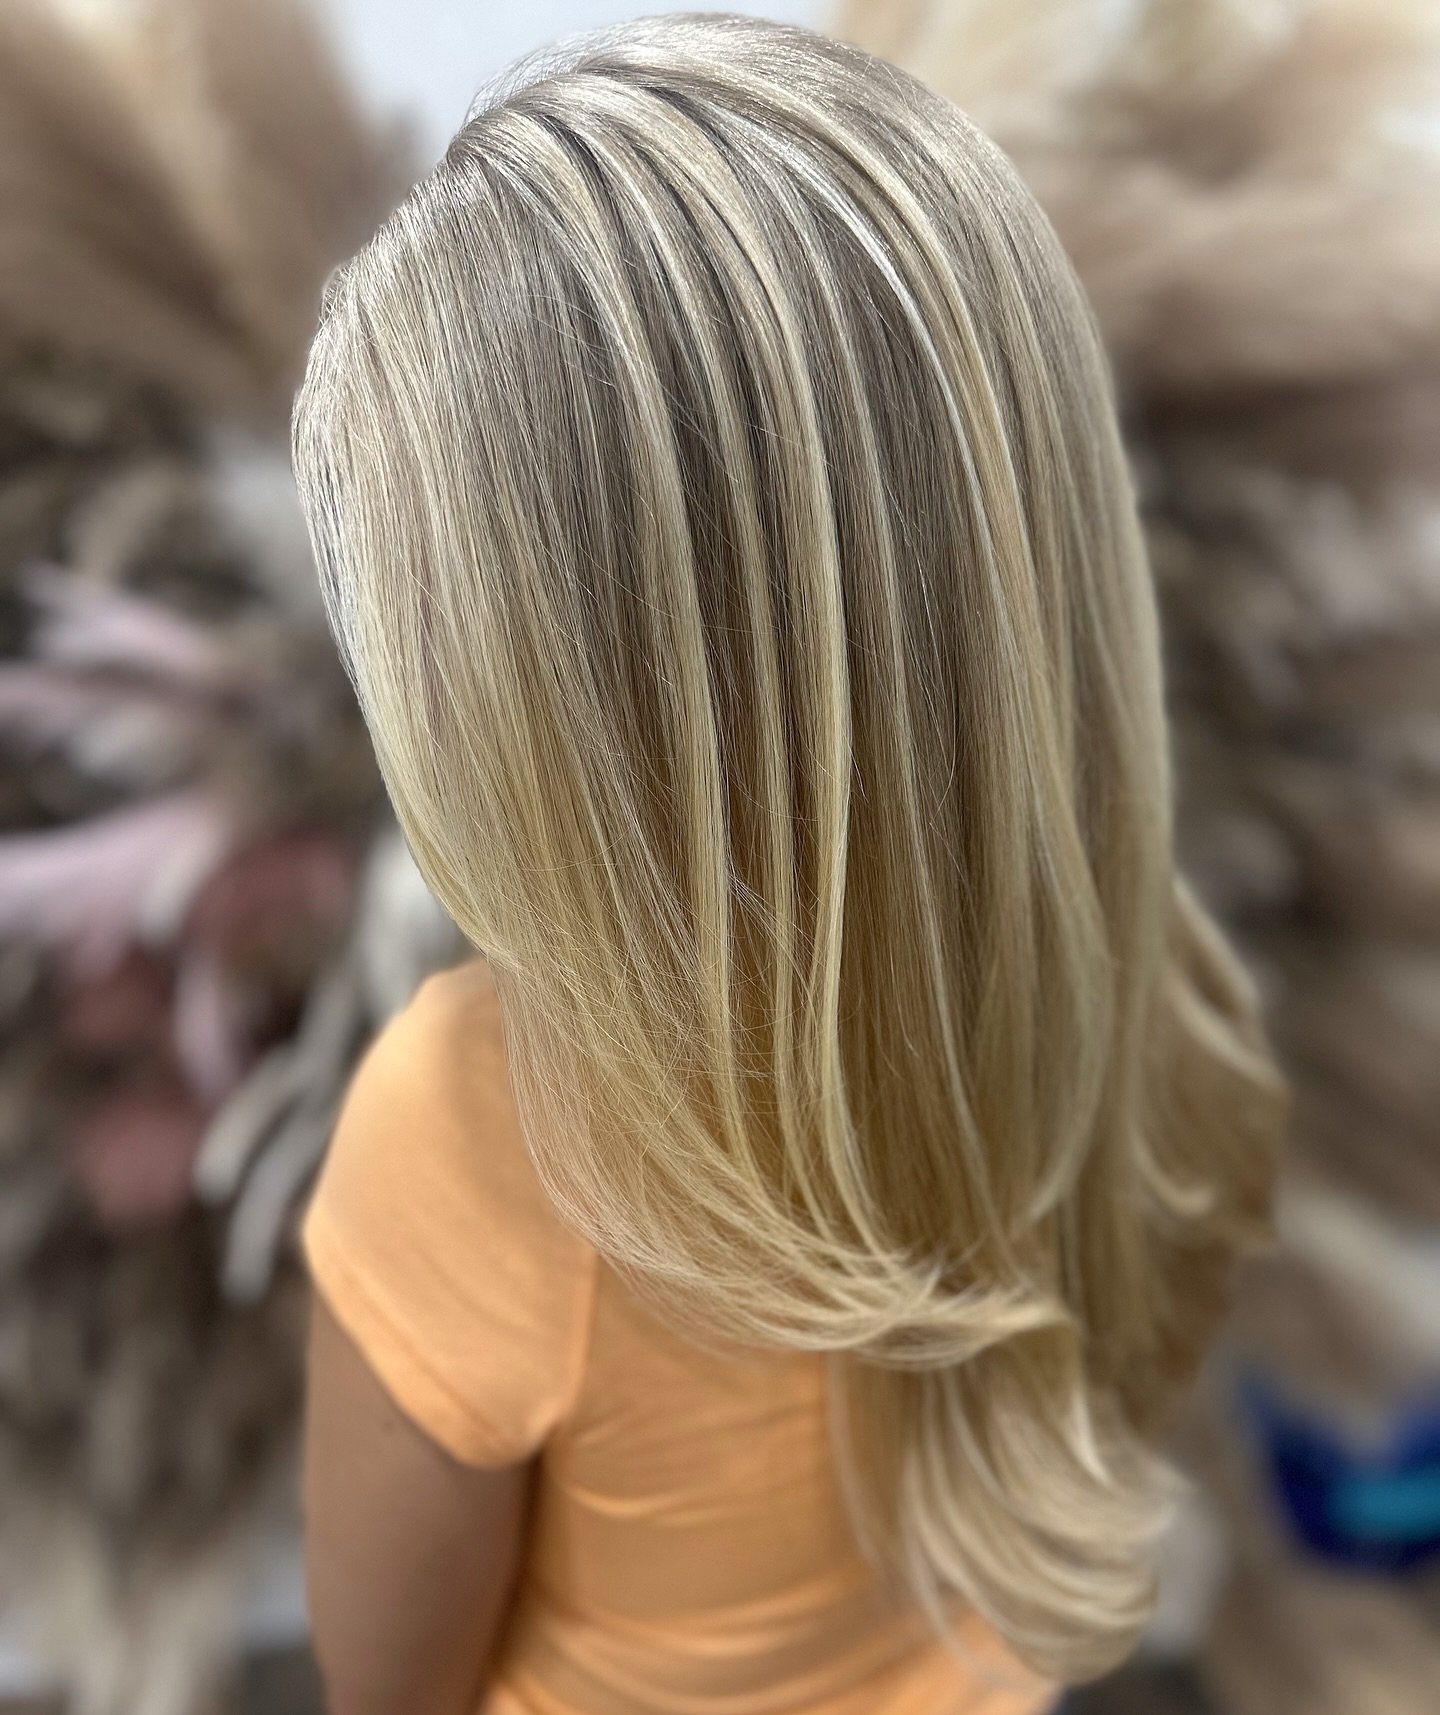 When you come across that blonding session that leaves you speechless ✨

This is the one. ☝️ 
@hairspecialist_kimmy_adonia 

Reminder ** Kimmy is booking WELL into summer right now. We can keep you on a cancellation list but we urge you - book ahead!